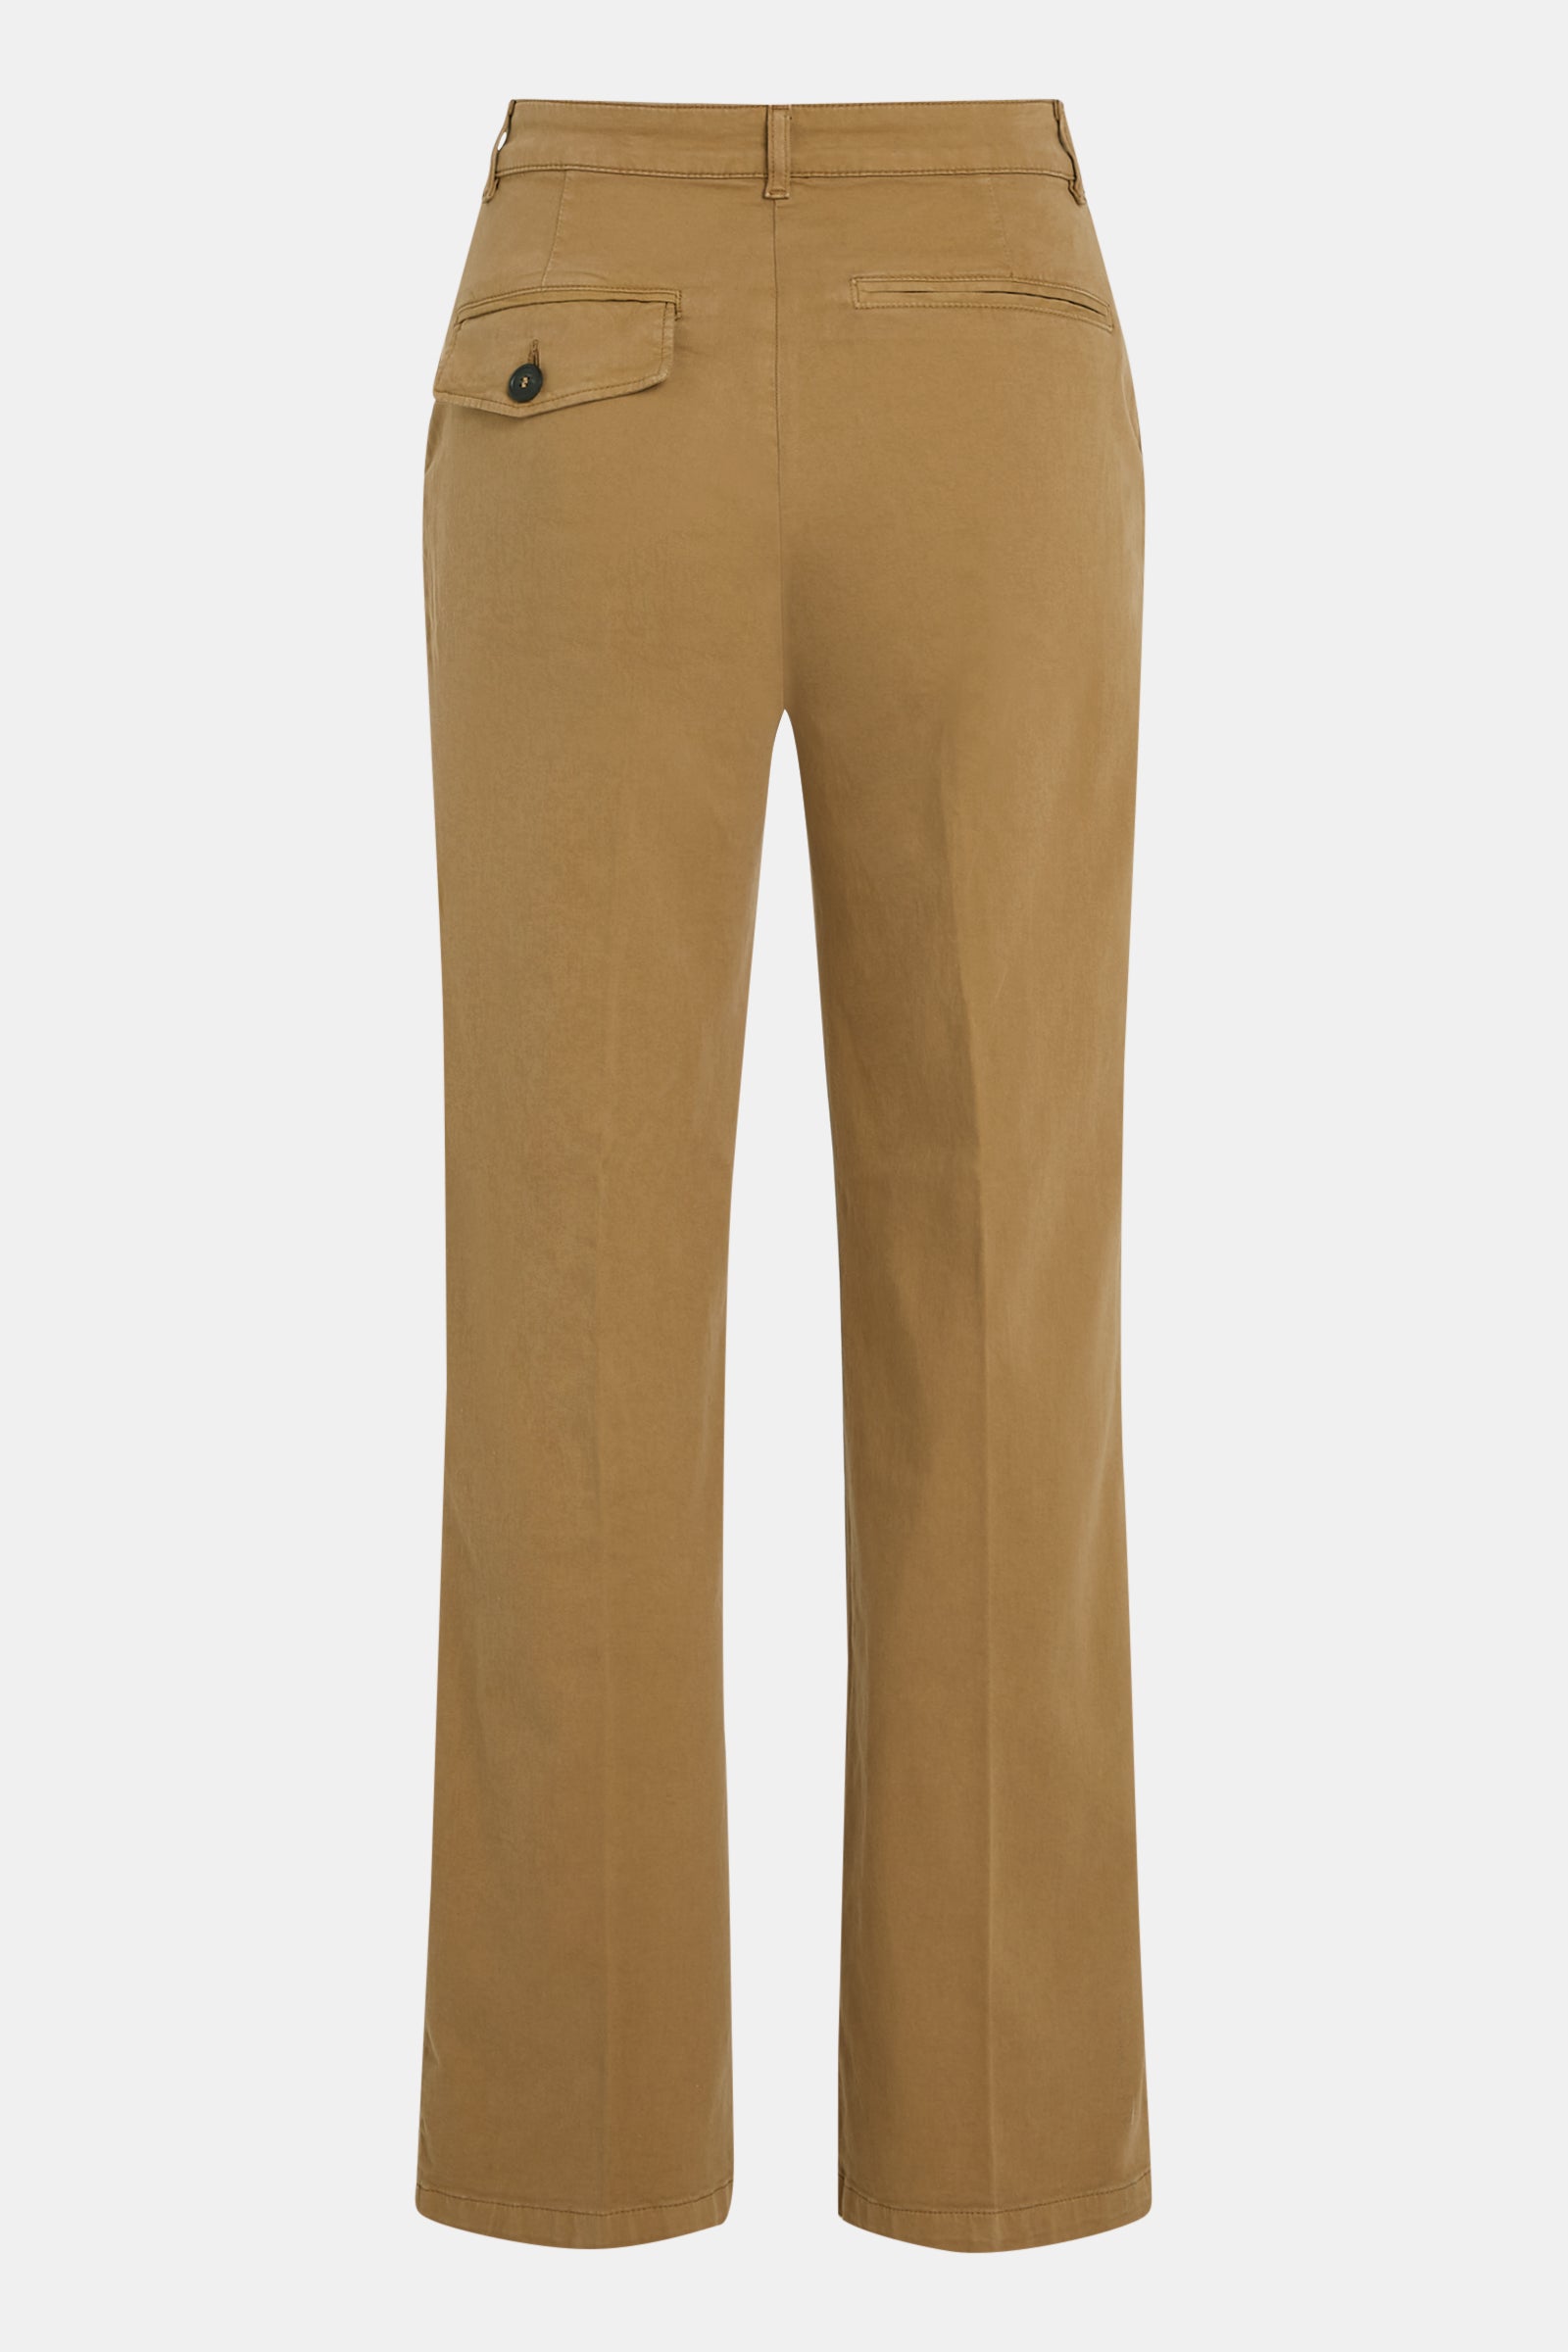 Penn&Ink N.Y Faux Leather Drawstring Cargo Pant Sand – Gotstyle